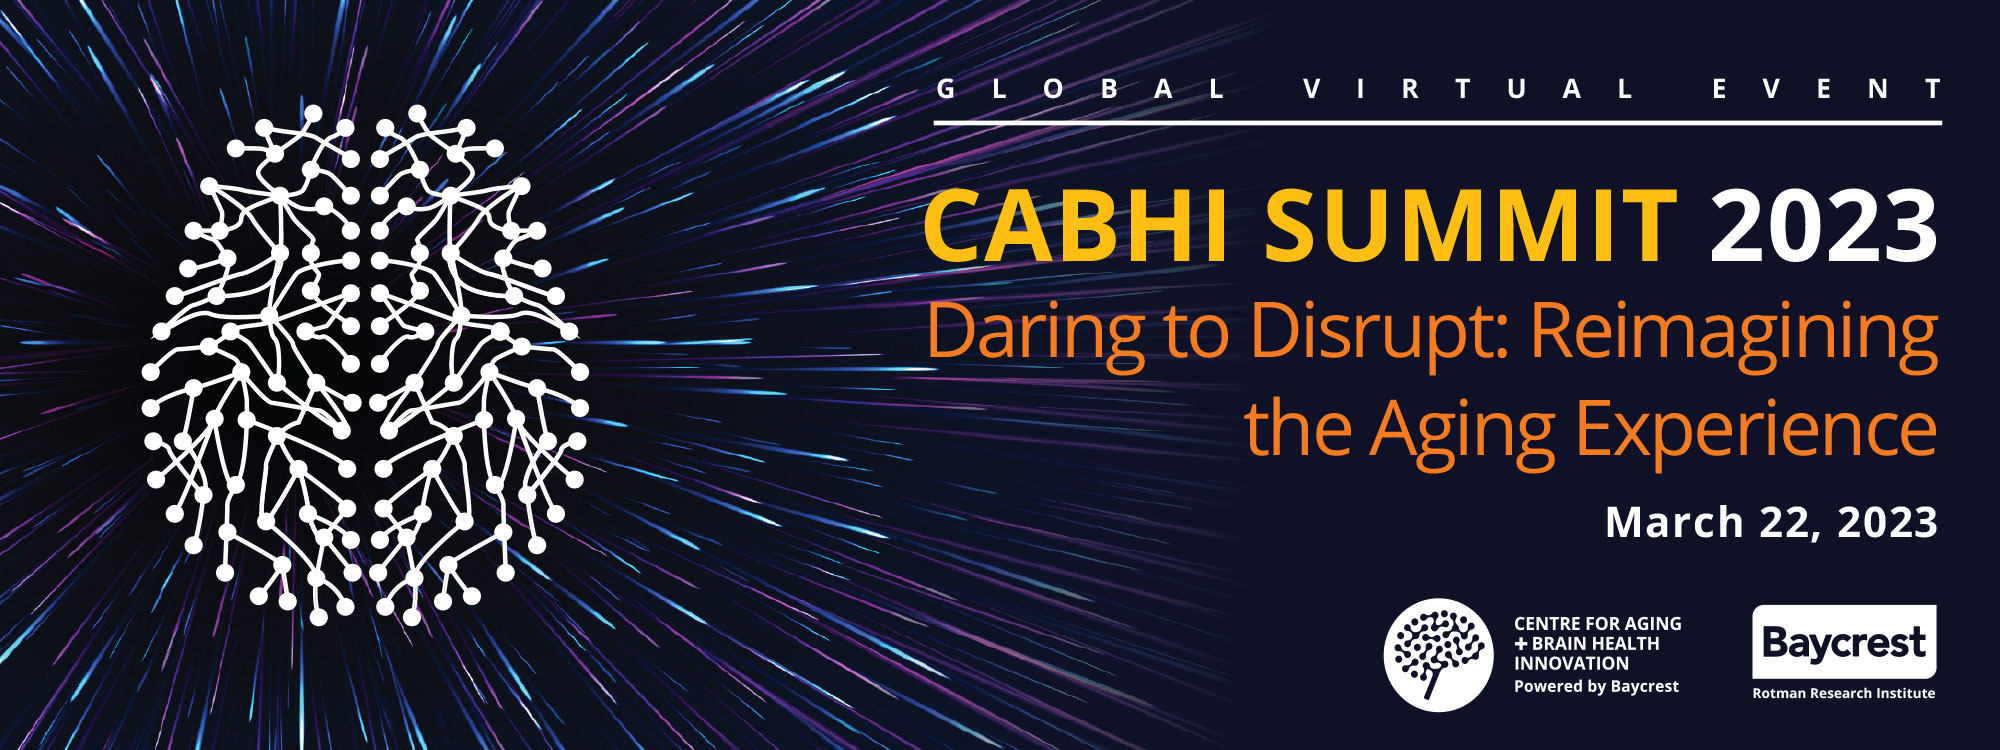 CABHI Summit 2023. Daring to Disrupt: Reimagining the Aging Experience. March 22, 2023. Gloval Virtual Event. On the left, an illustration of a brain is visible.